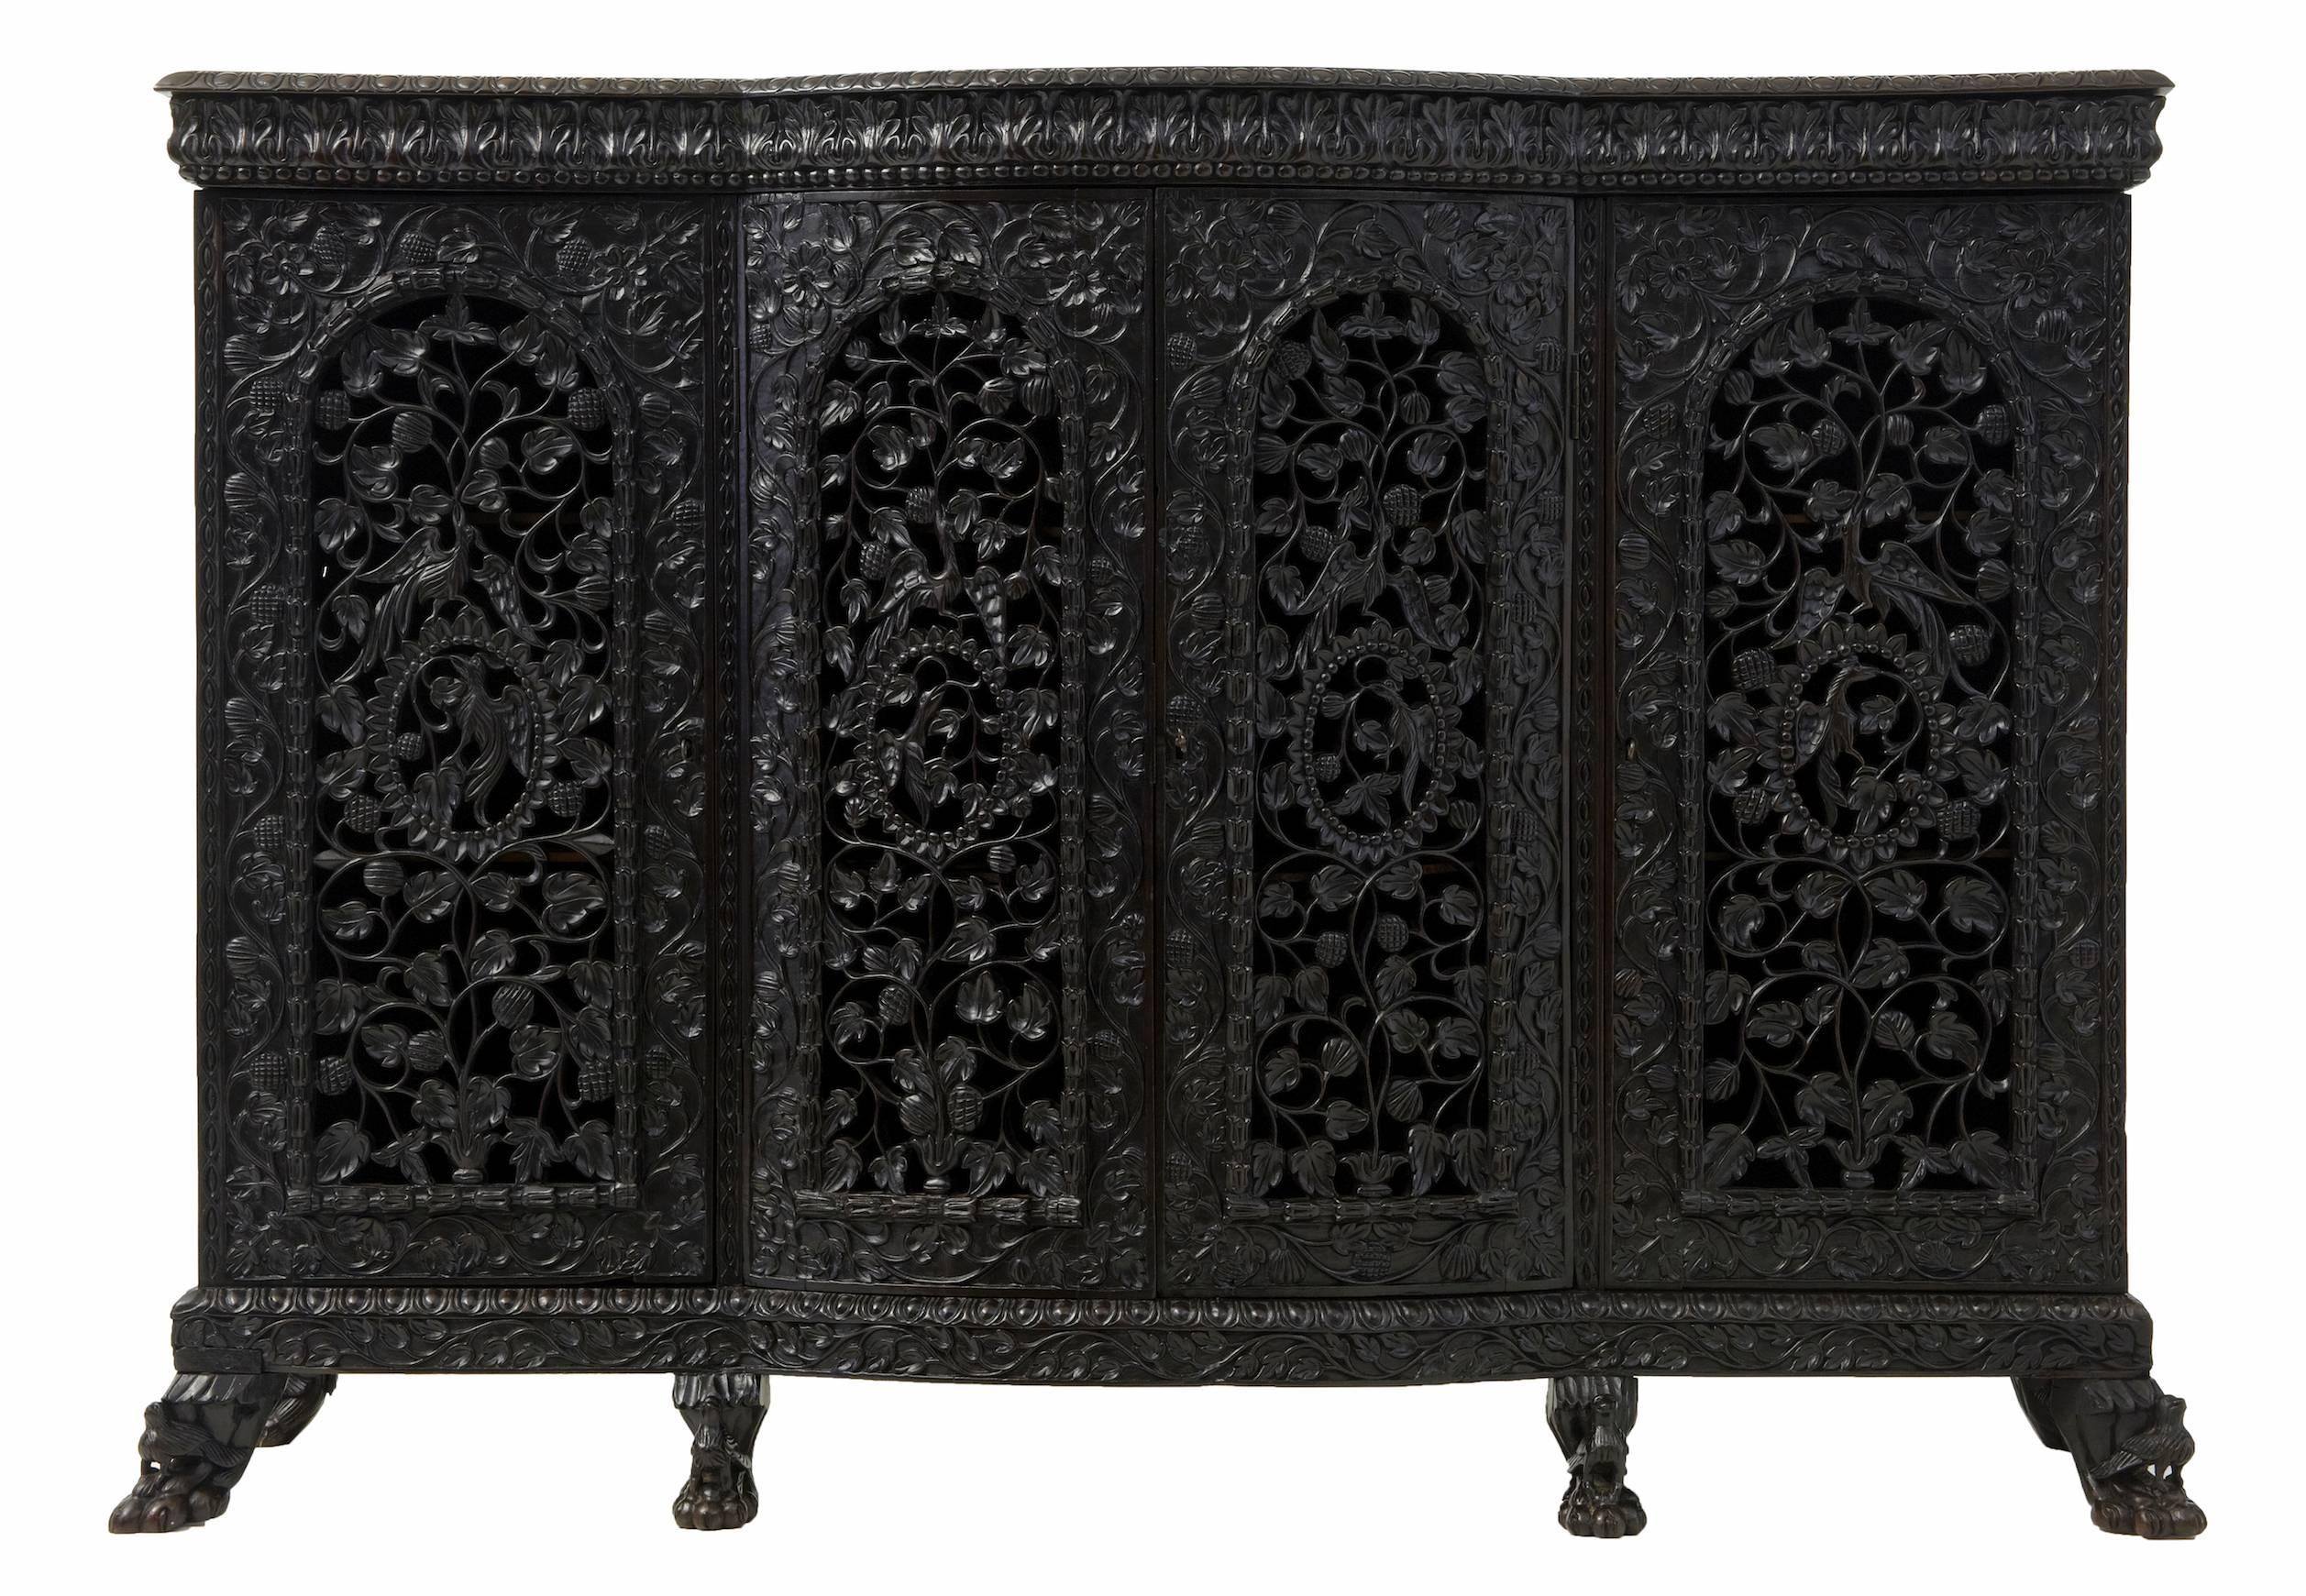 Superb quality Anglo Indian breakfront cabinet circa 1840.
Central double door cupboard with 2 shelves flanked either side by single door cupboard with 2 shelves.
Profusely pierced and carved front doors depicting birds and flowers.
Carved sides